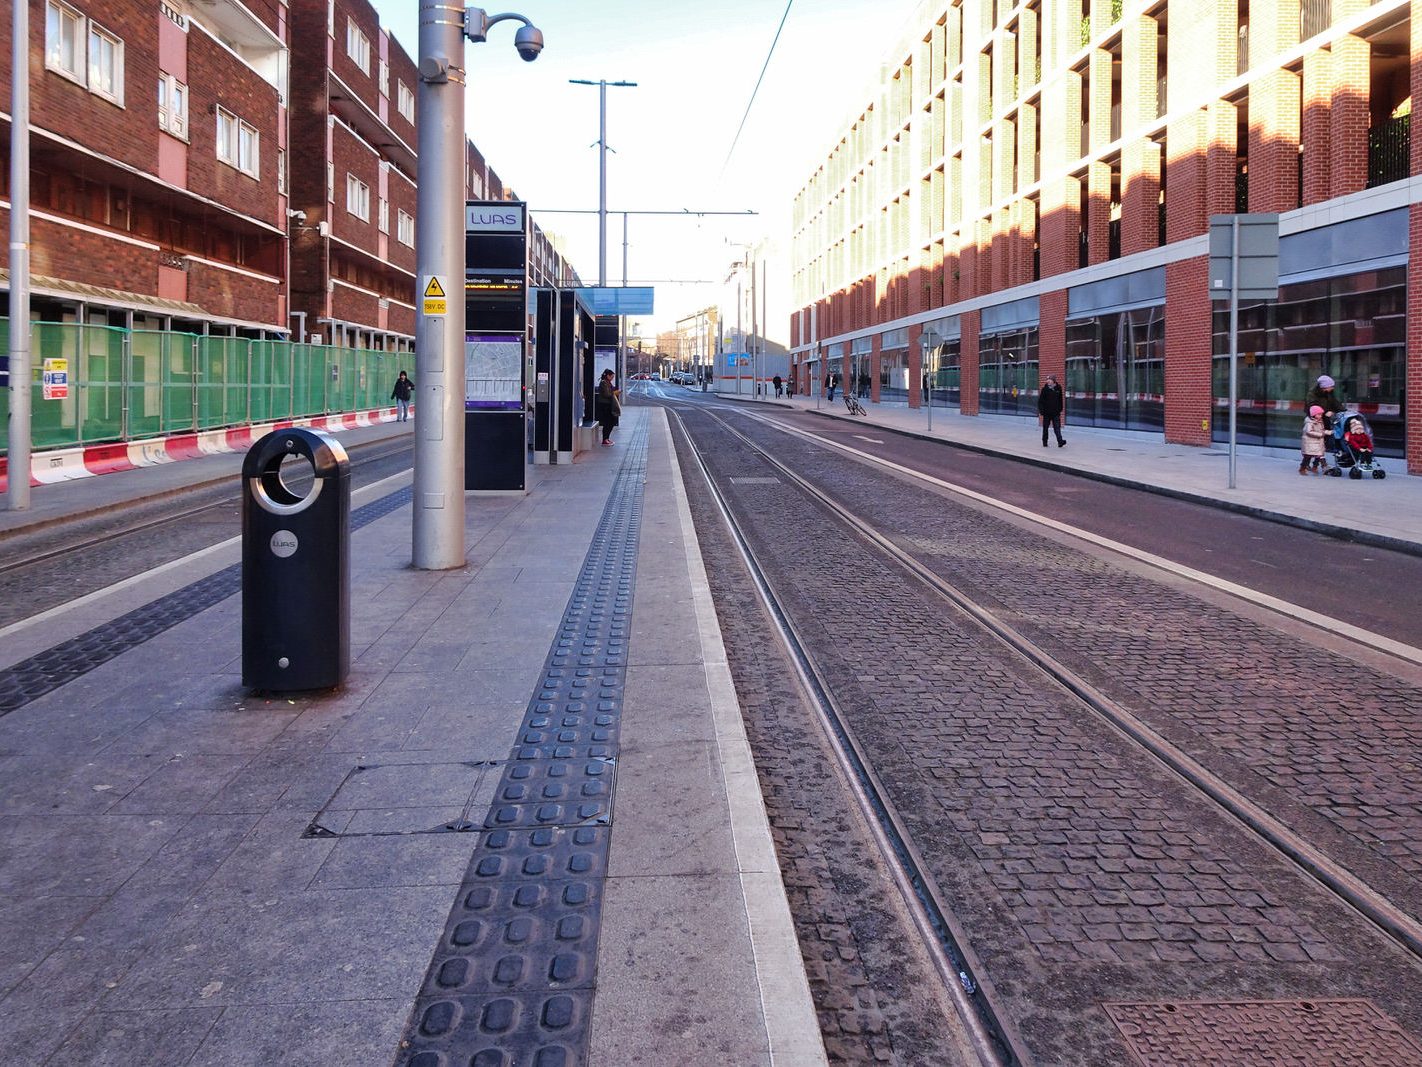 I USUALLY AVOID THE DOMINICK STREET LUAS TRAM STOP 003